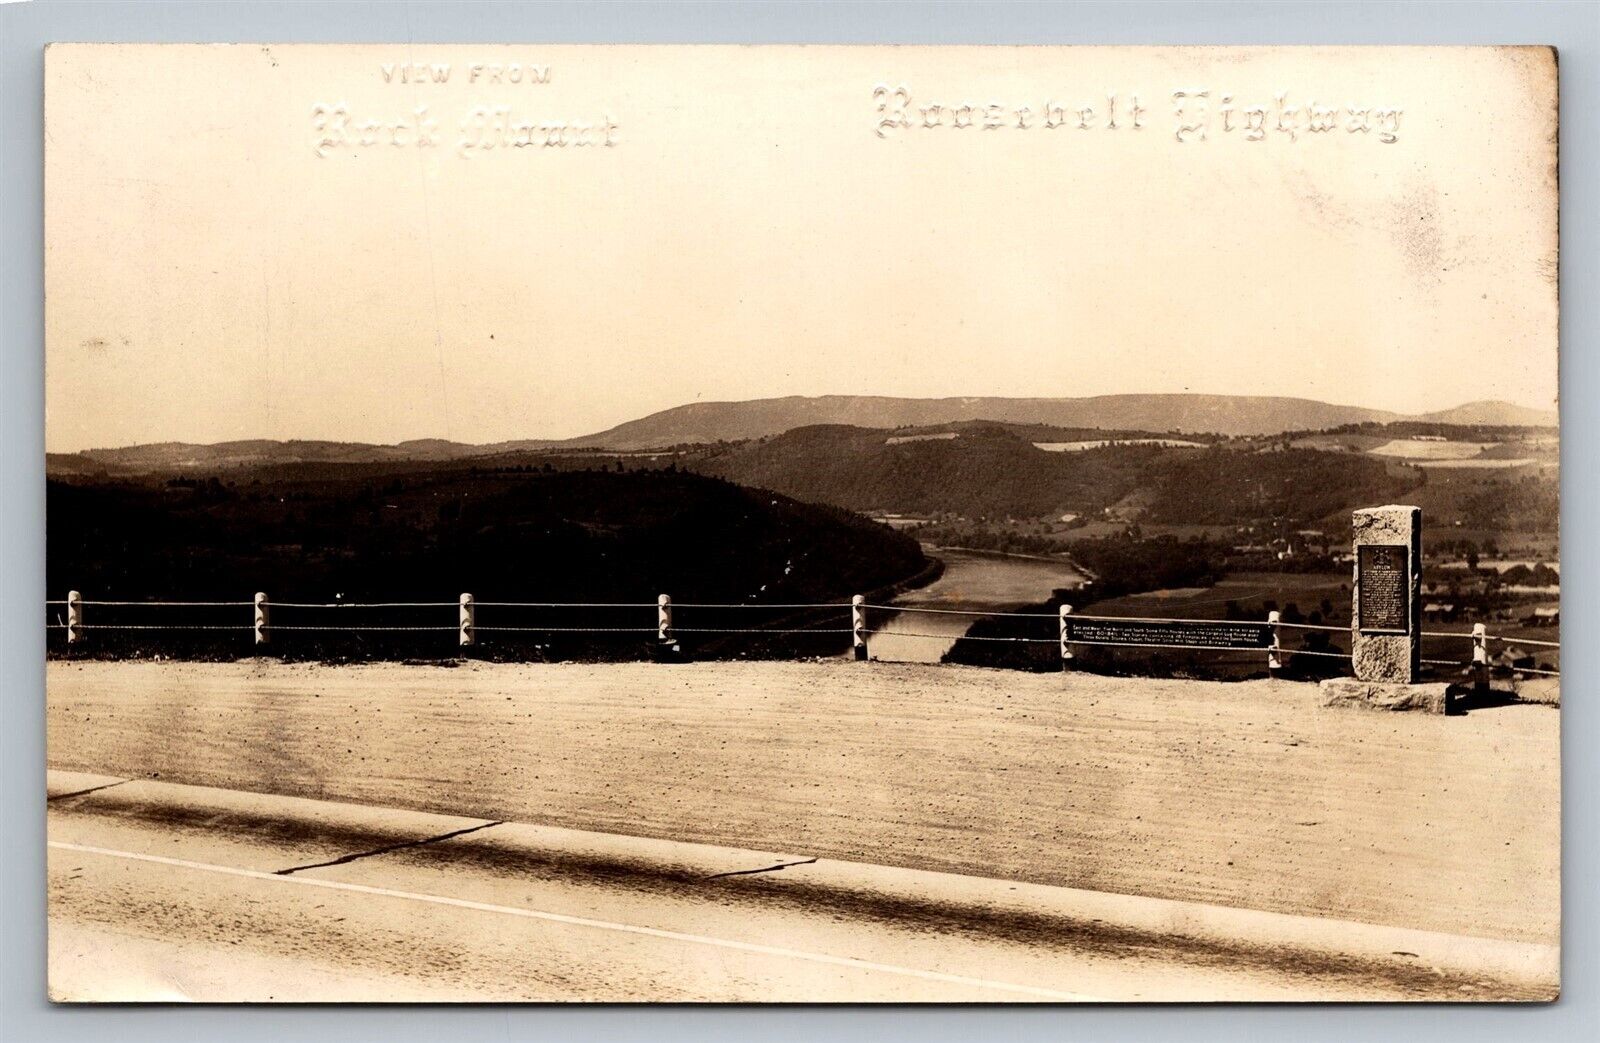 PA View from Rock Mount Roosevelt Highway Frenchtown Asylum Marker Vtg Postcard